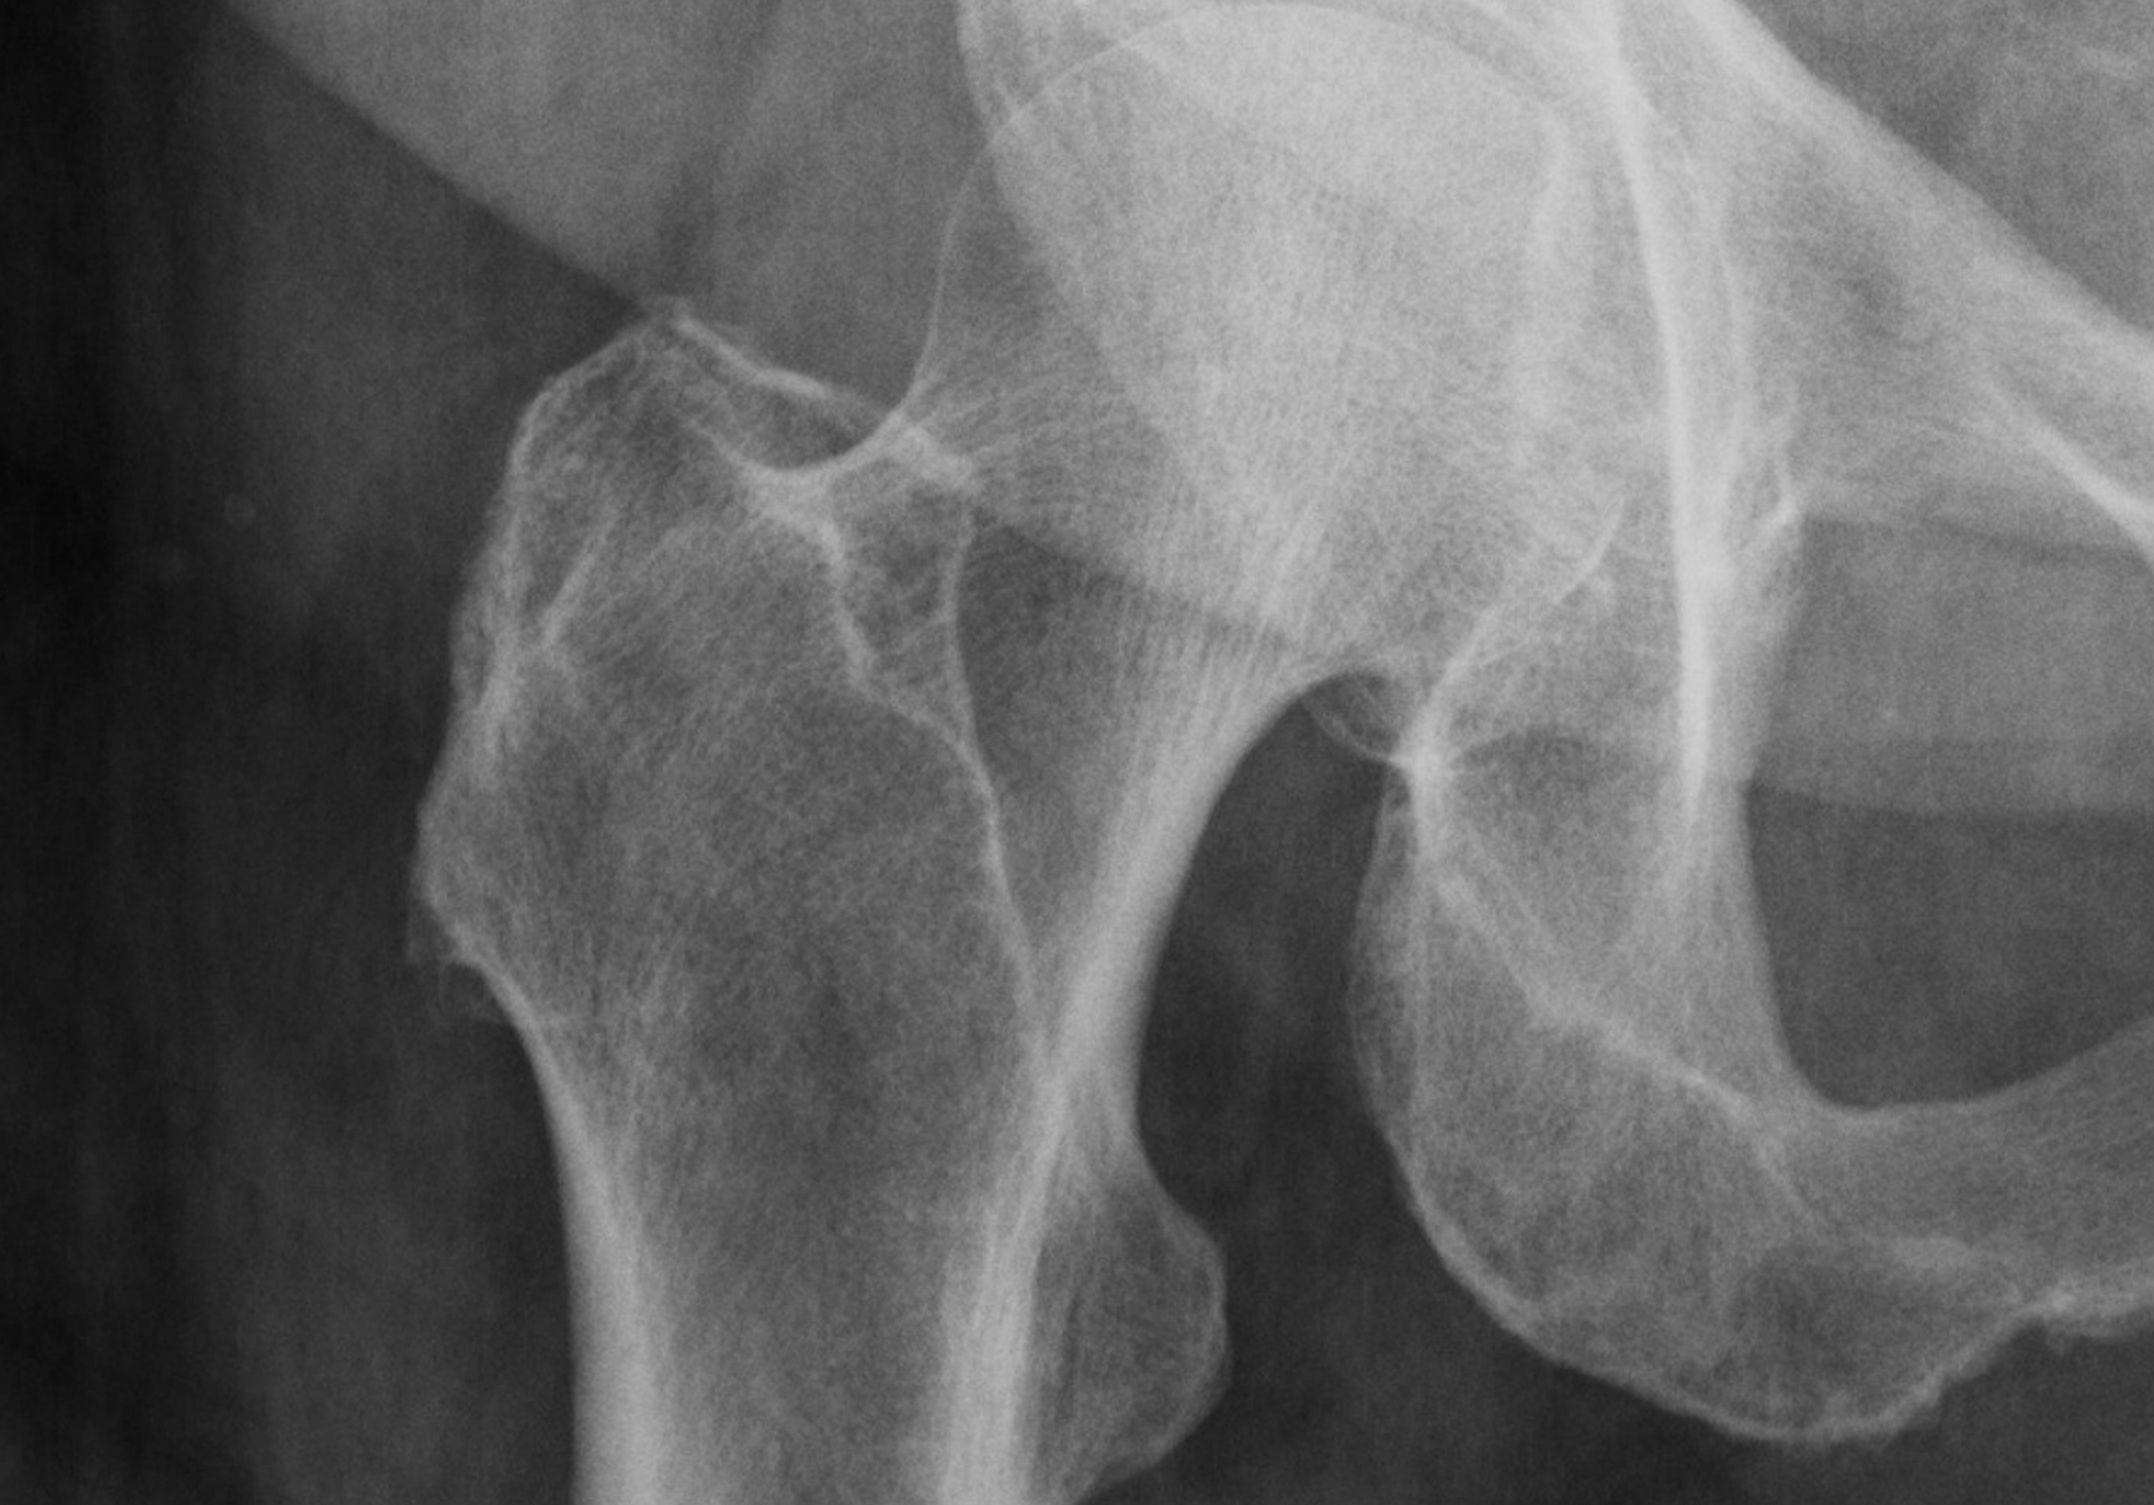 FRAX Score Improves Secondary Fracture Prevention